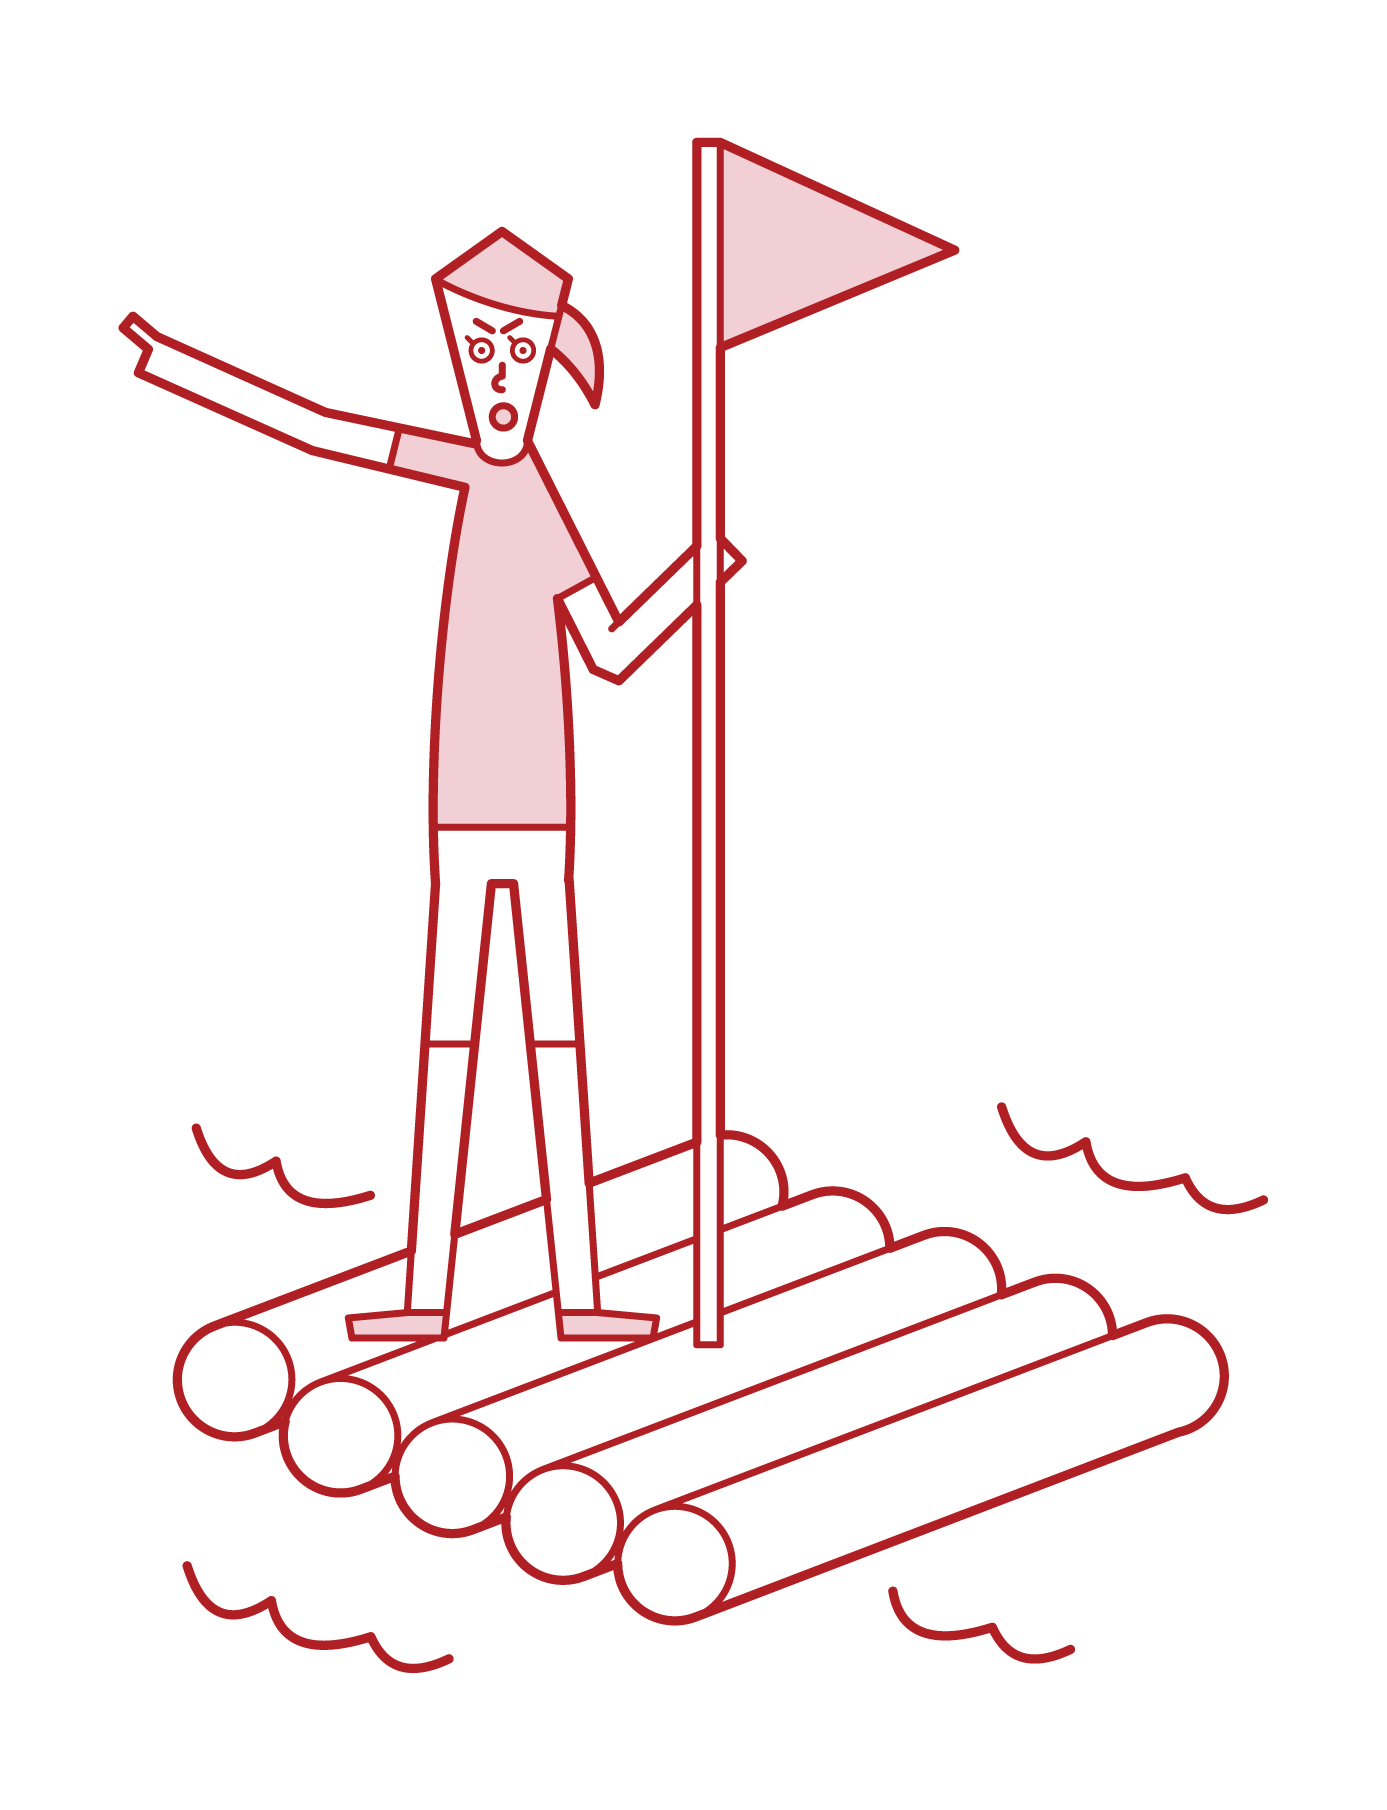 Illustration of a woman traveling on a raft